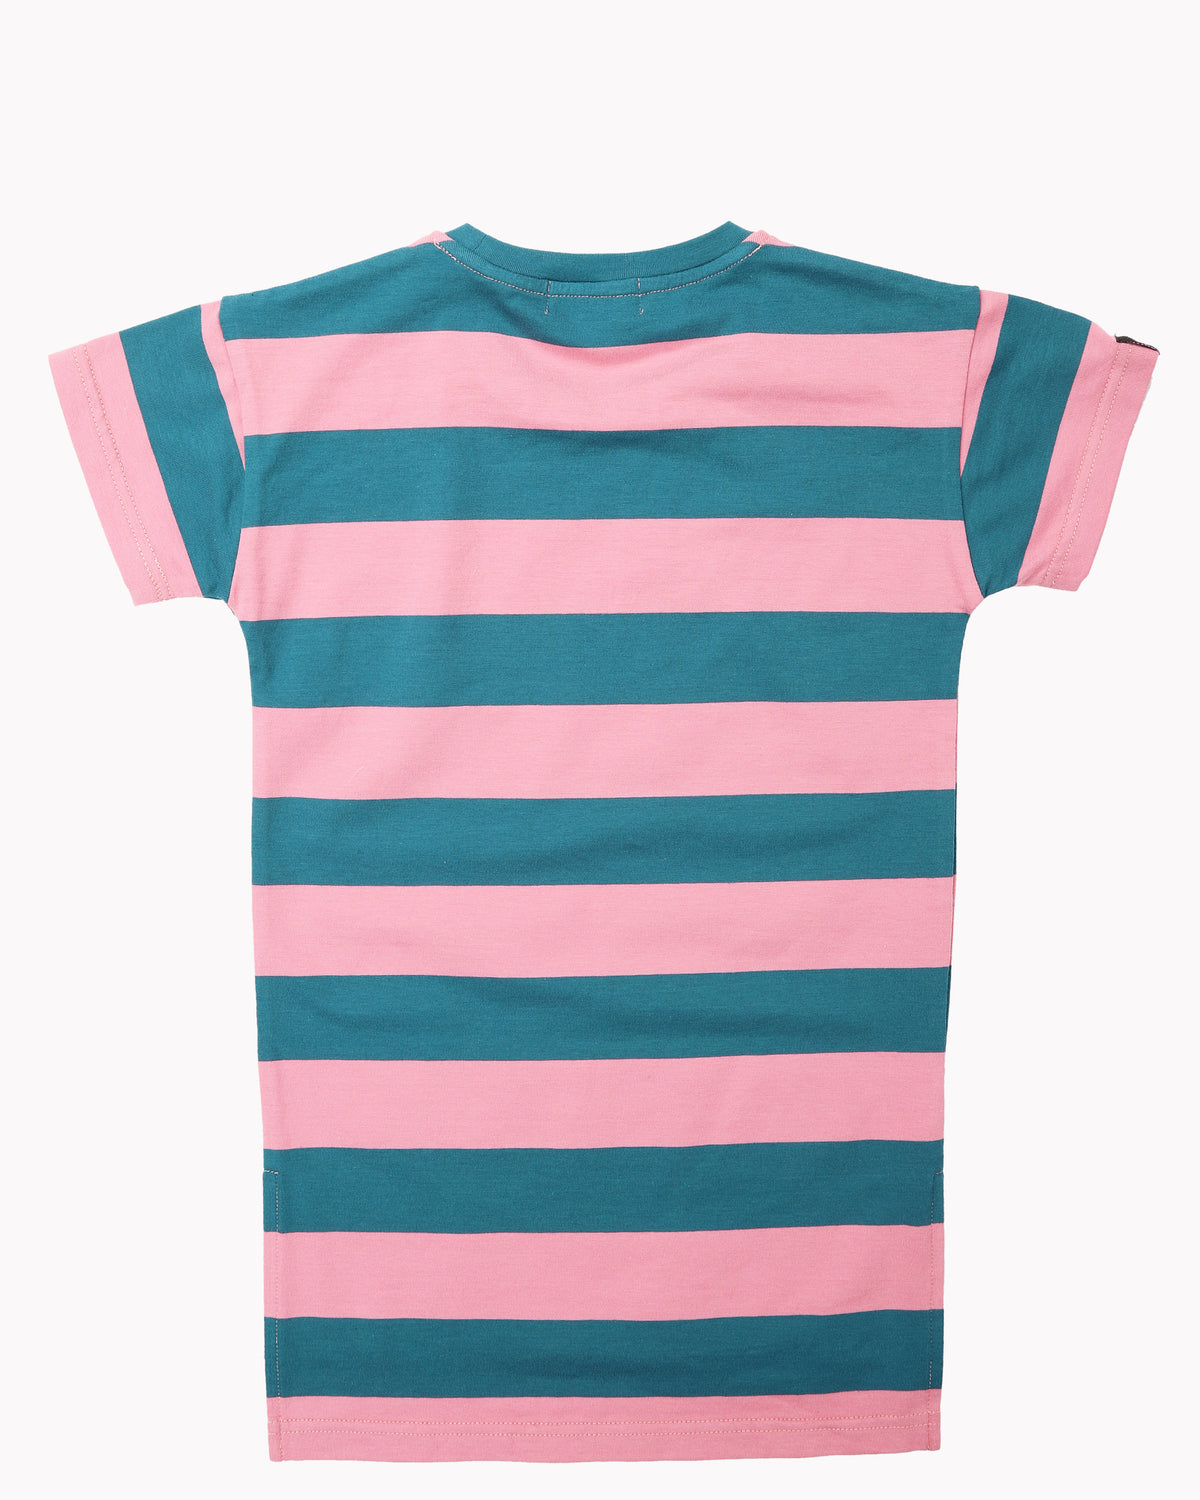 Wide Stripes T-Shirt Dress In Teal and Pink Back